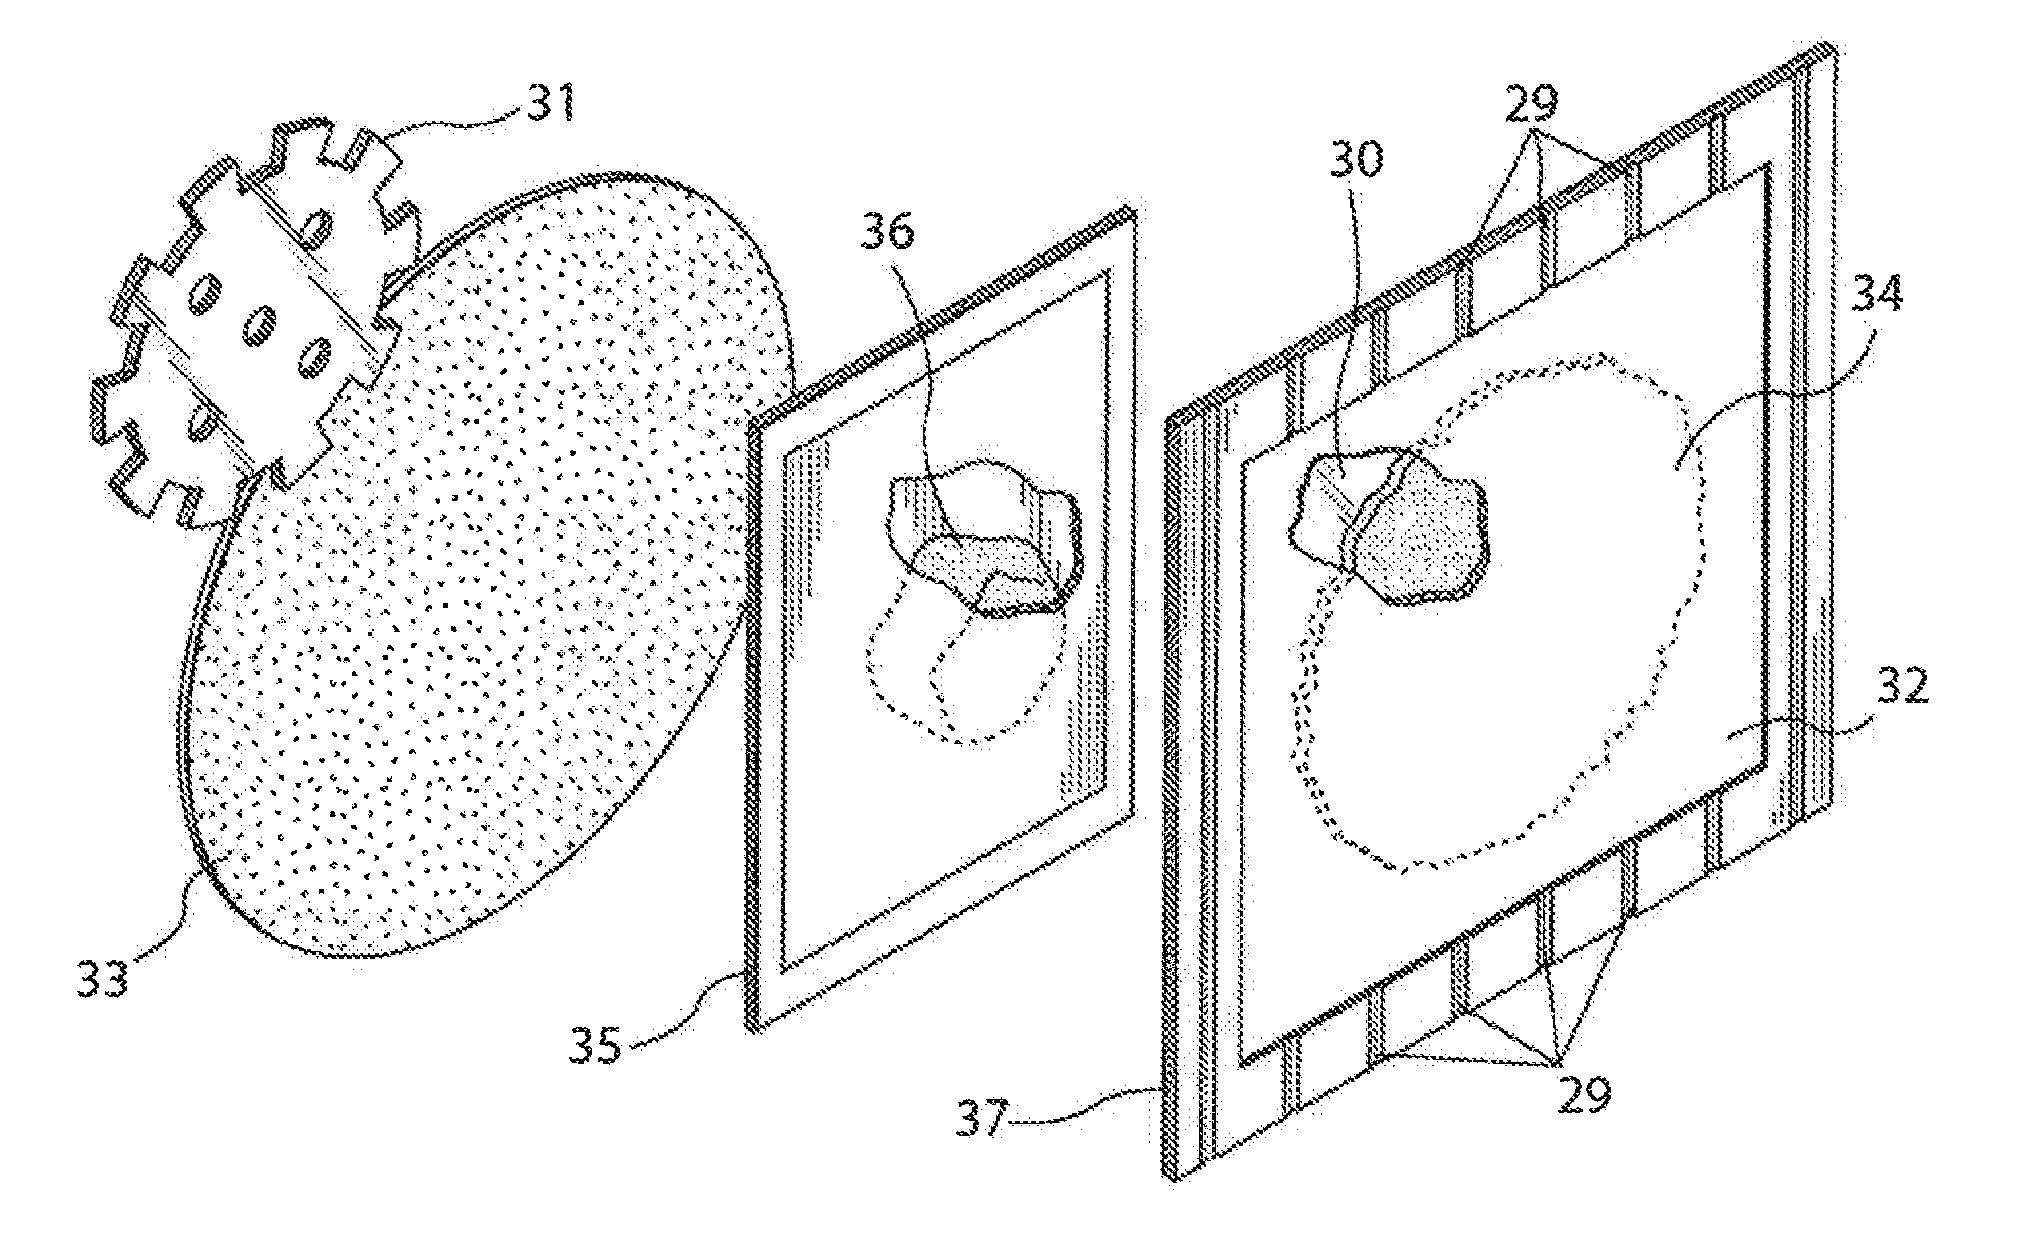 Systems and methods for patching and repairing wall board